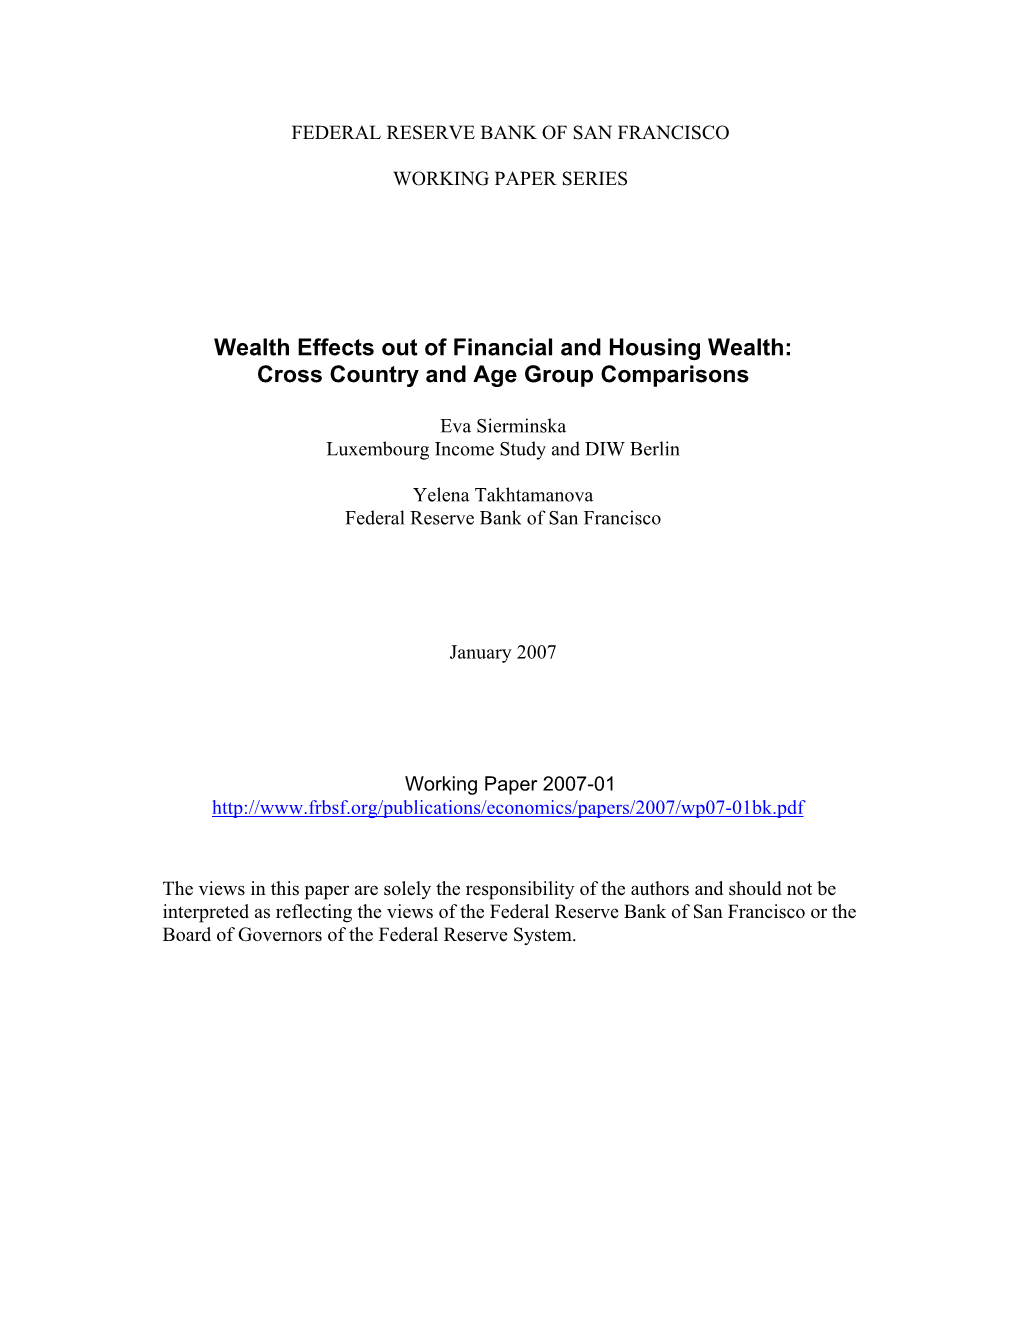 Wealth Effects out of Financial and Housing Wealth: Cross Country and Age Group Comparisons